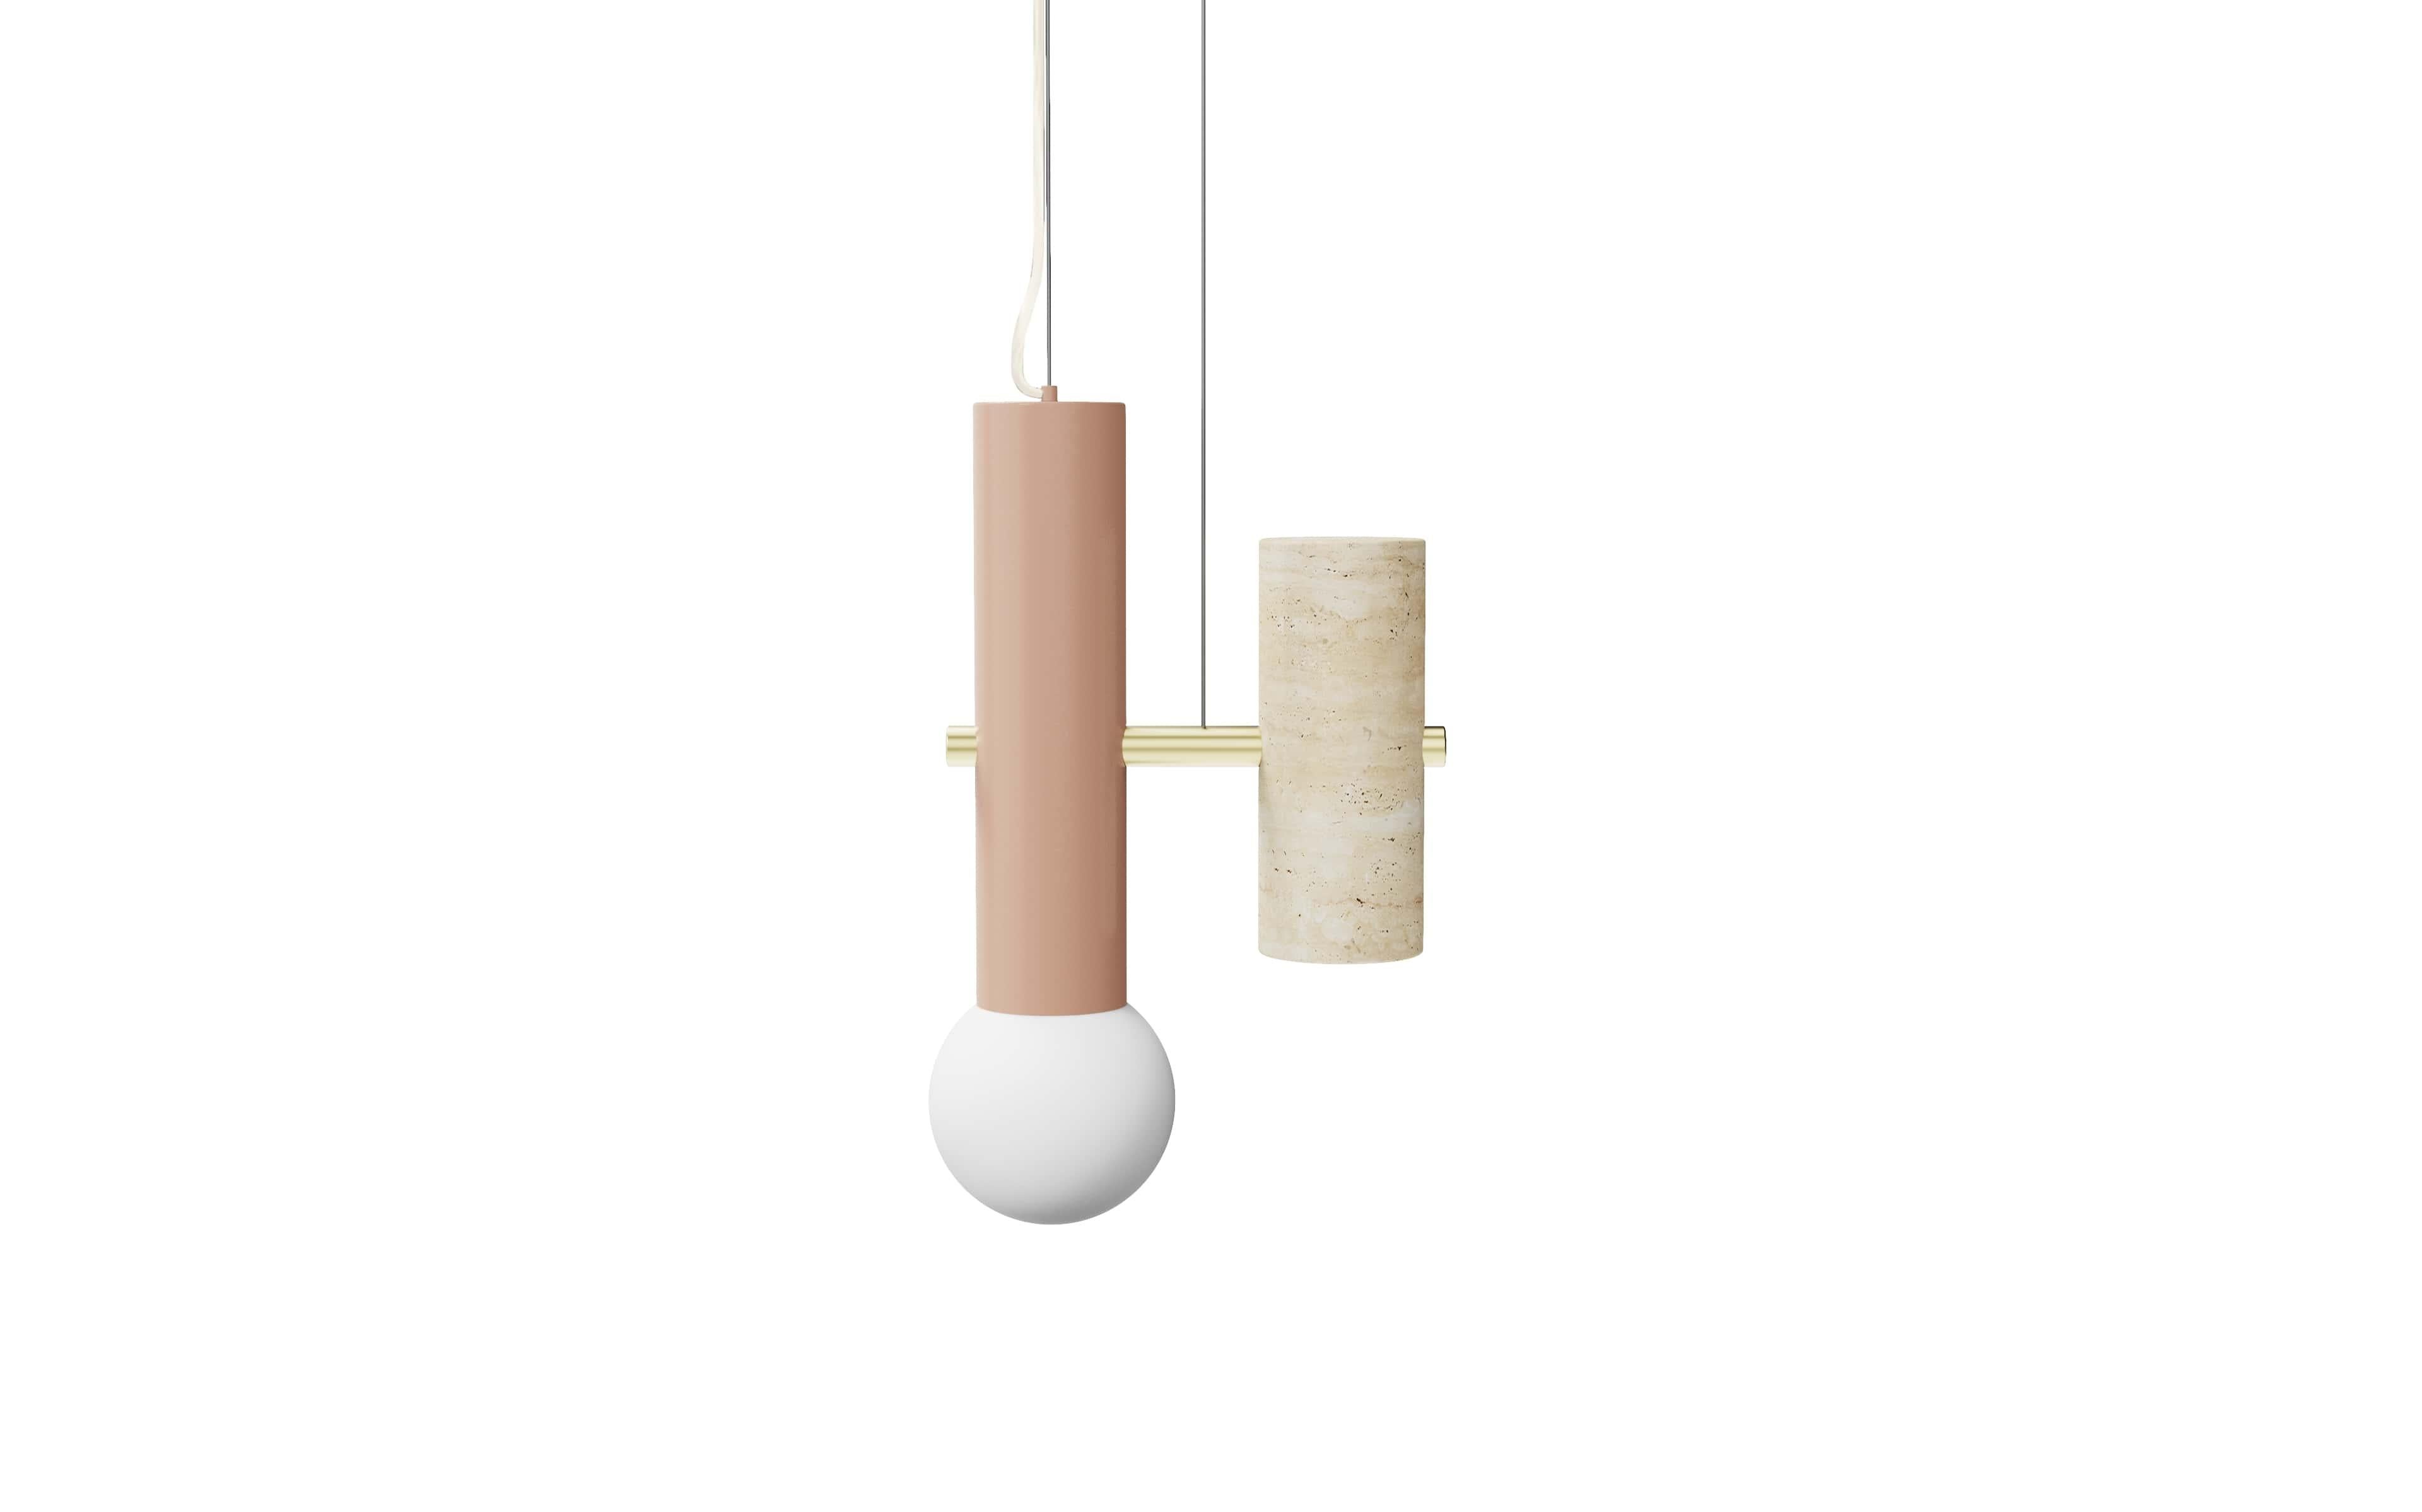 Pyppe single I lamp by Dooq
Dimensions: 37 x 24 x 12 cm
Materials: Lacquered metal, brass, nickel/copper, travertine

All our lamps can be wired according to each country. If sold to the USA it will be wired for the USA for instance.

Dooq is